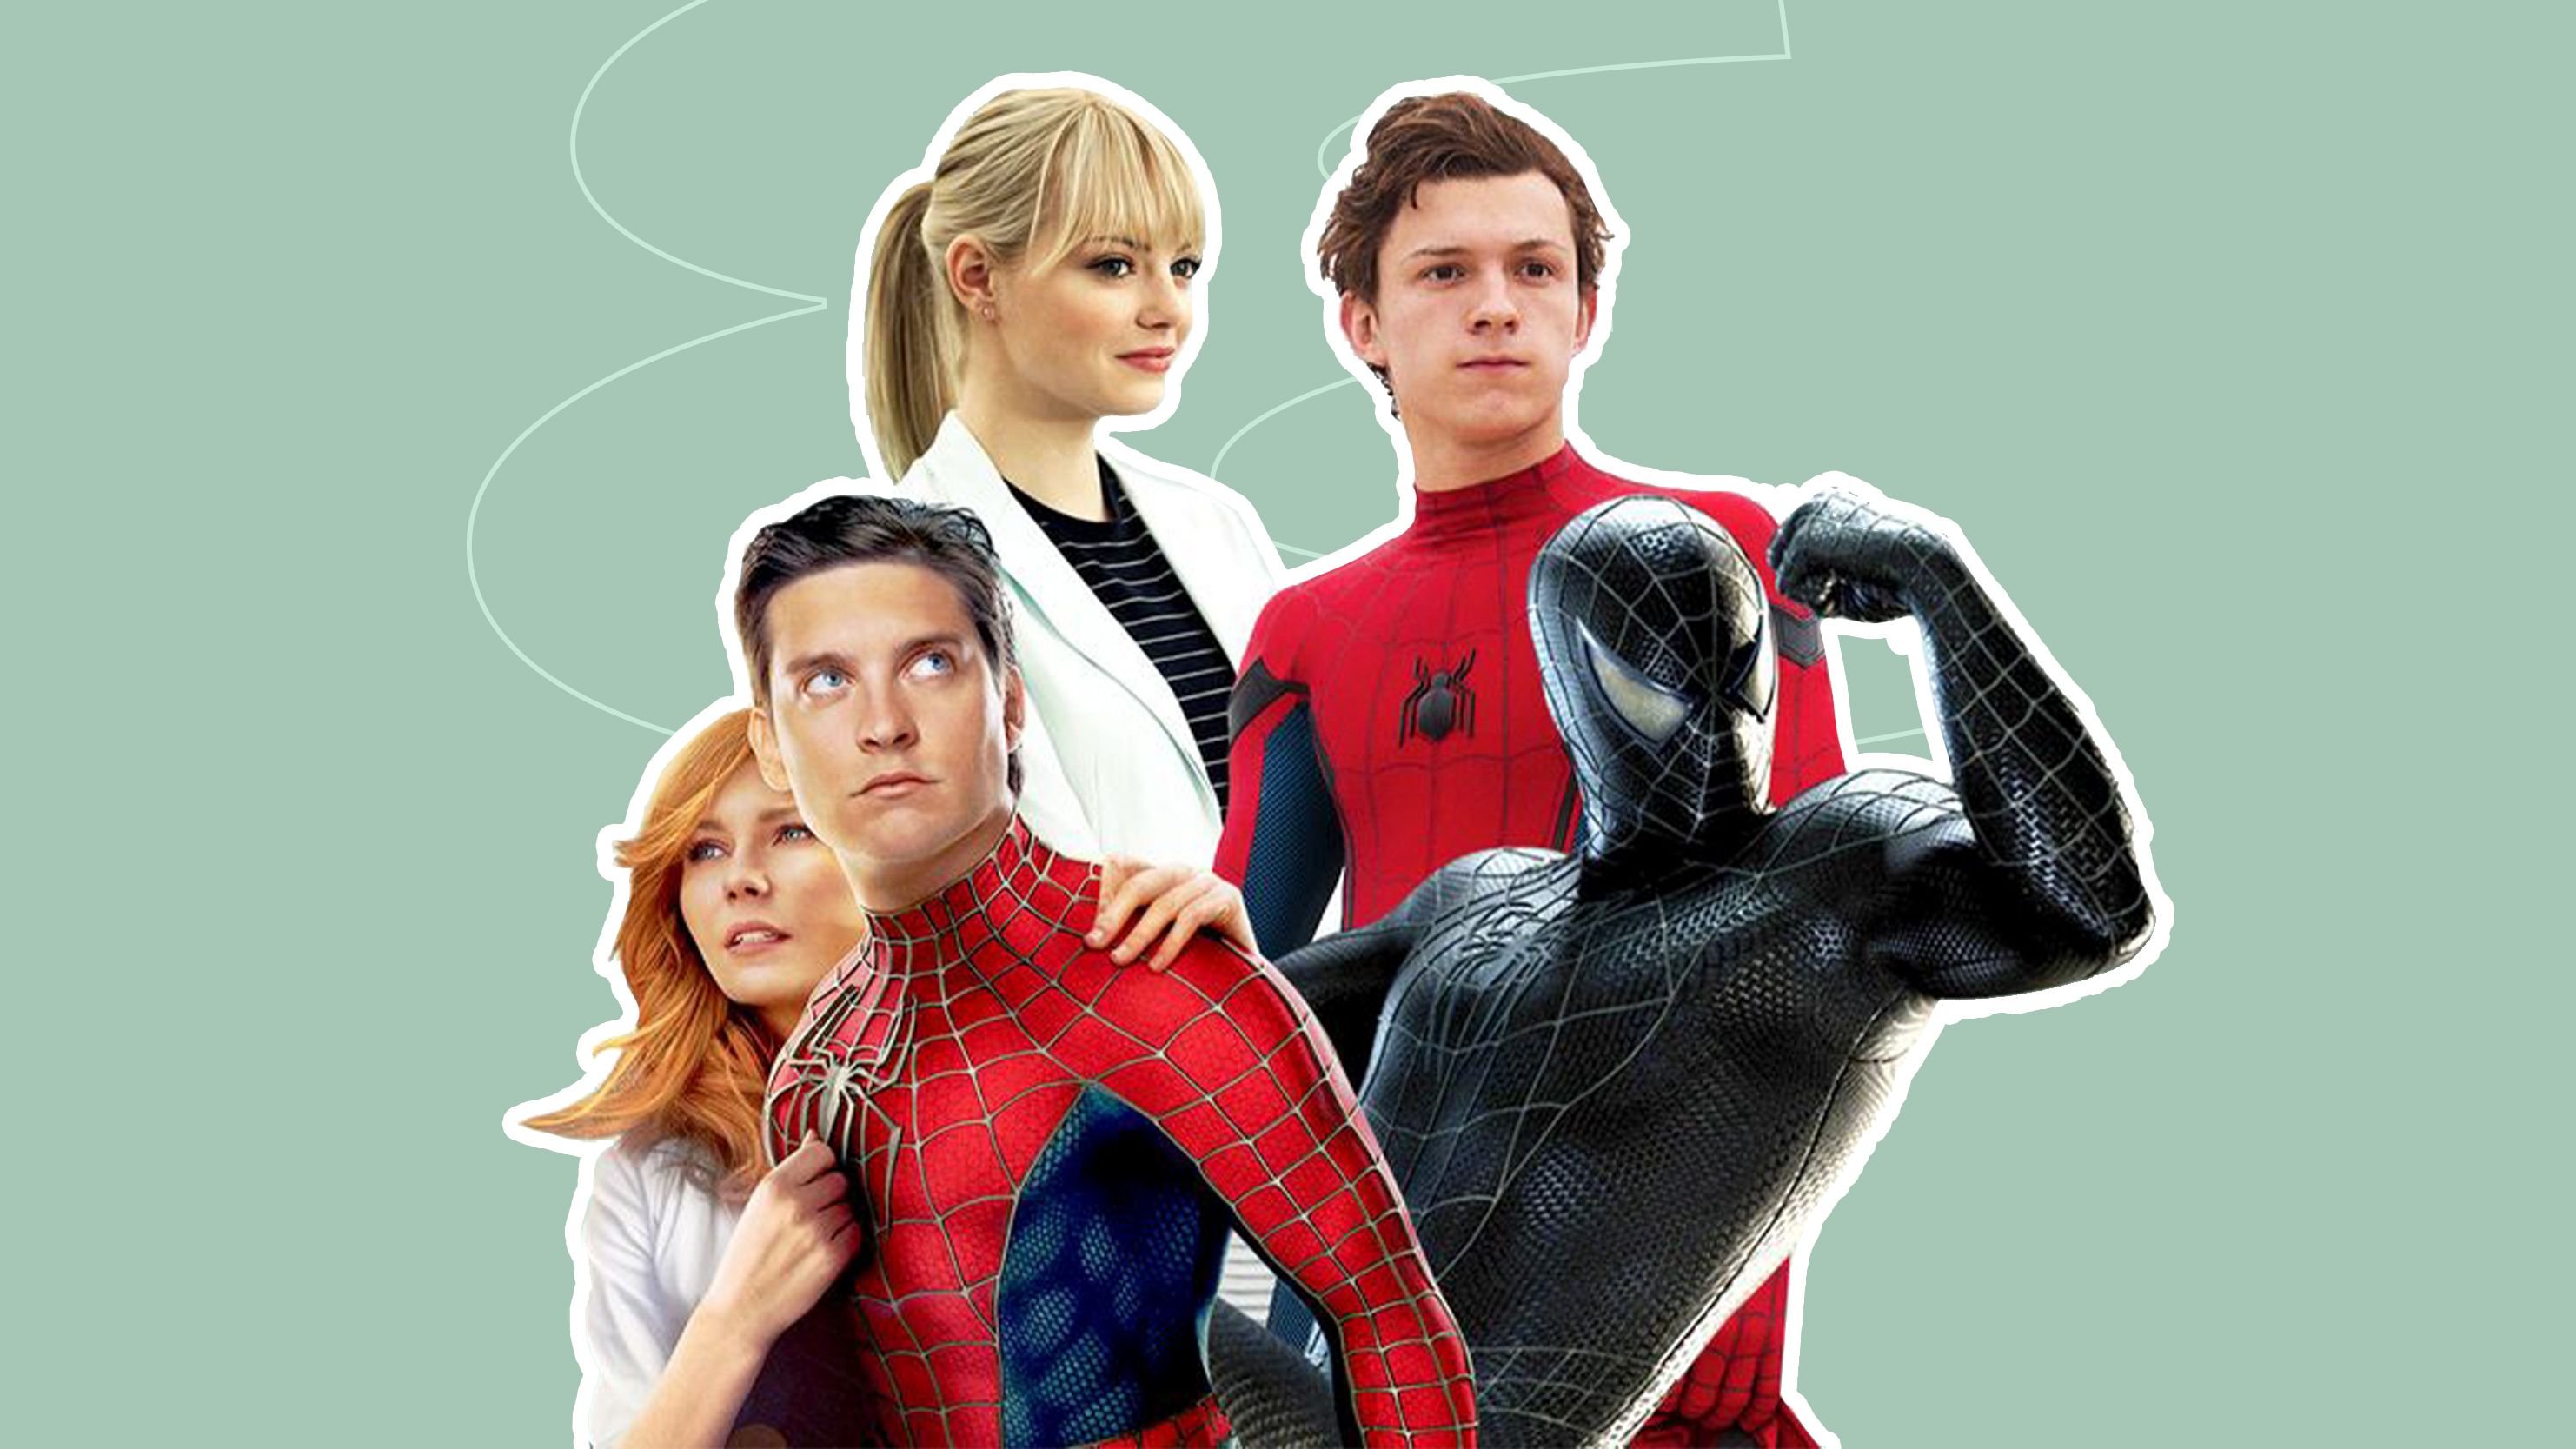 How to Watch the Spider-Man Movies in Order